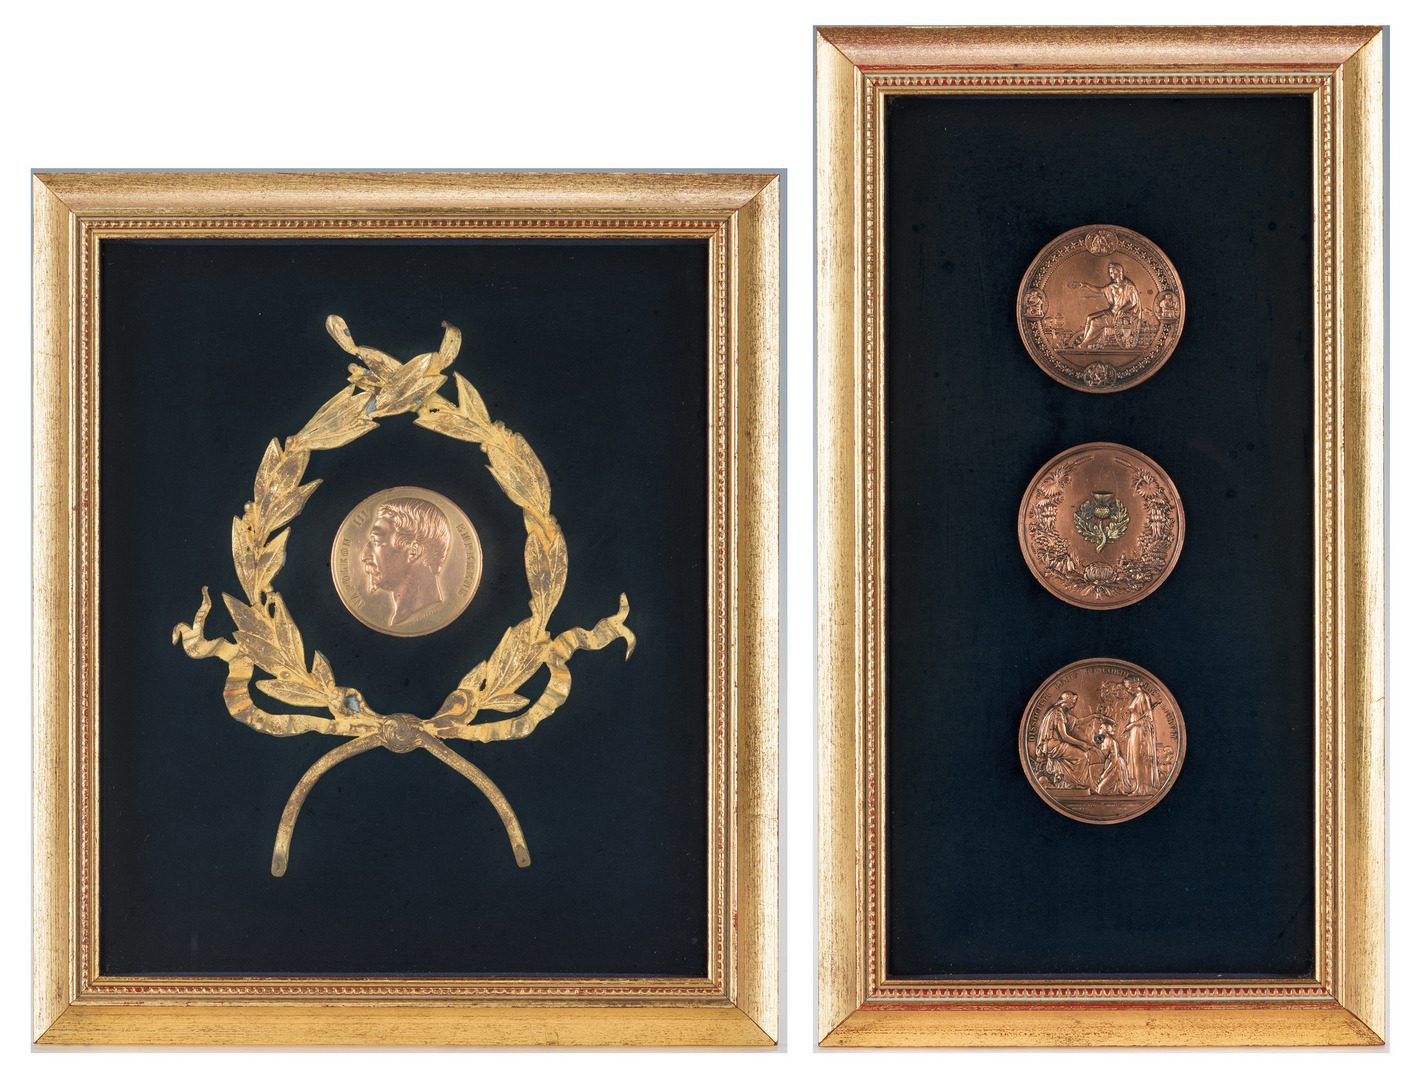 Lot 169: 4 Medallions in 2 Frames, incl. Wyon 1851 Exhibition